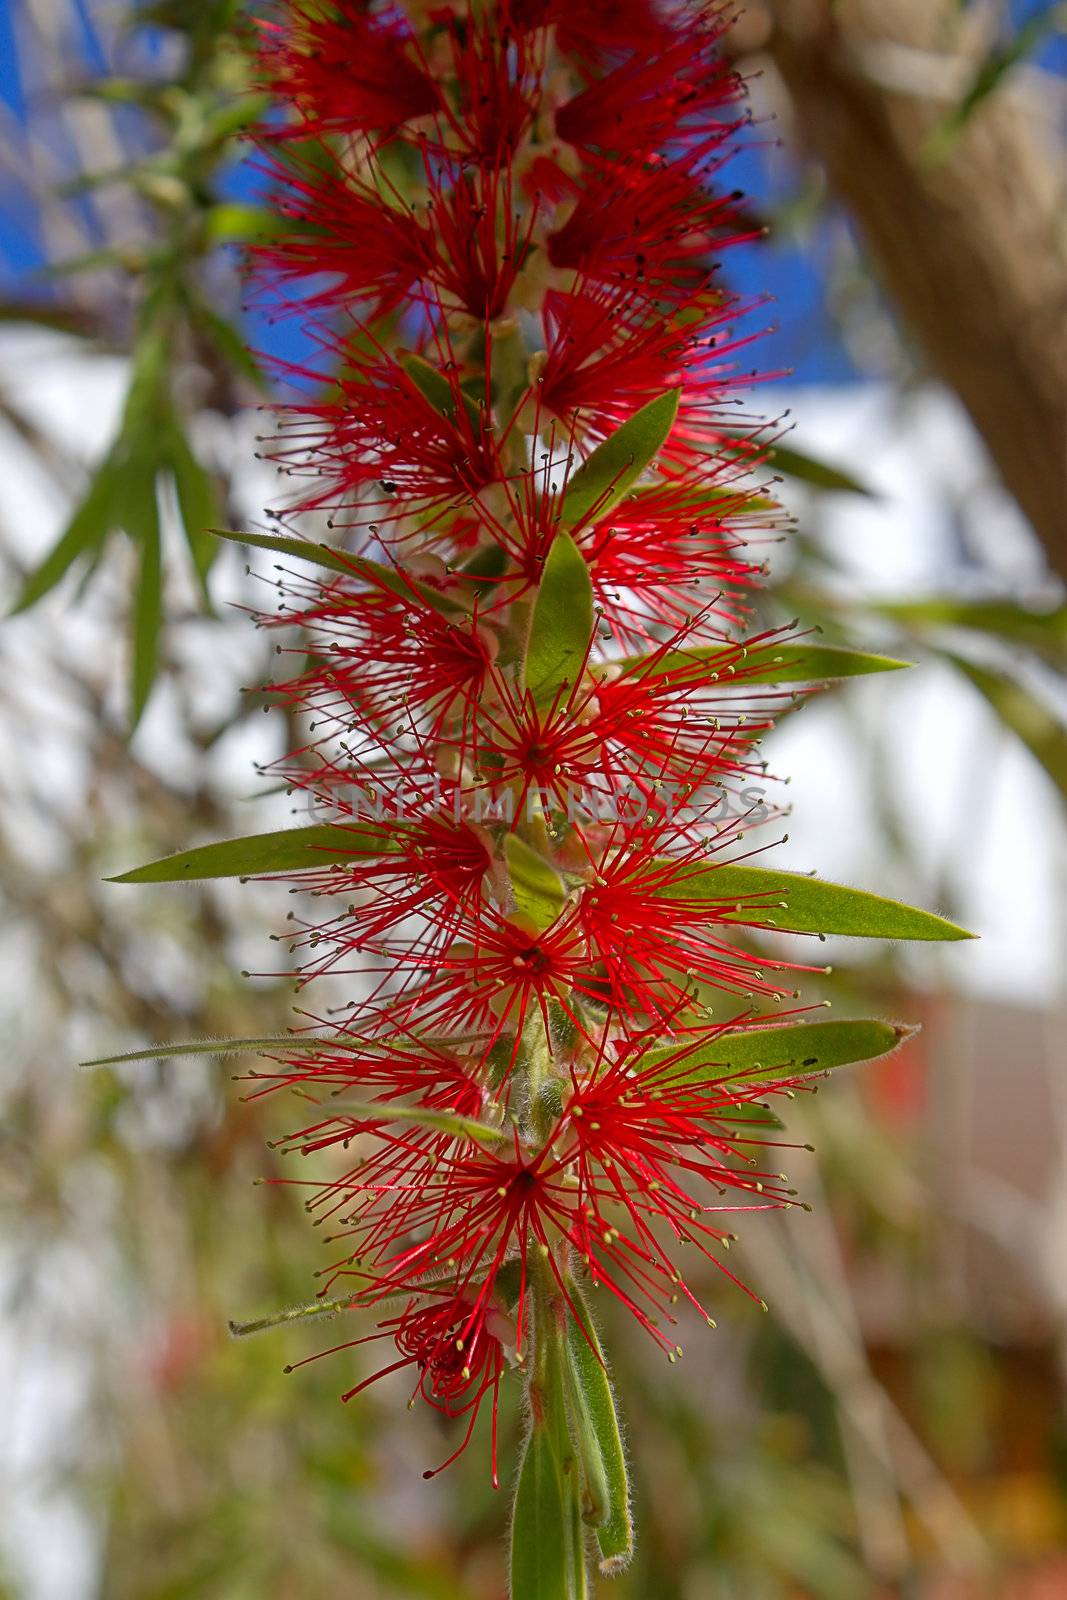 An interesting red flower with many stamens. Egypt.